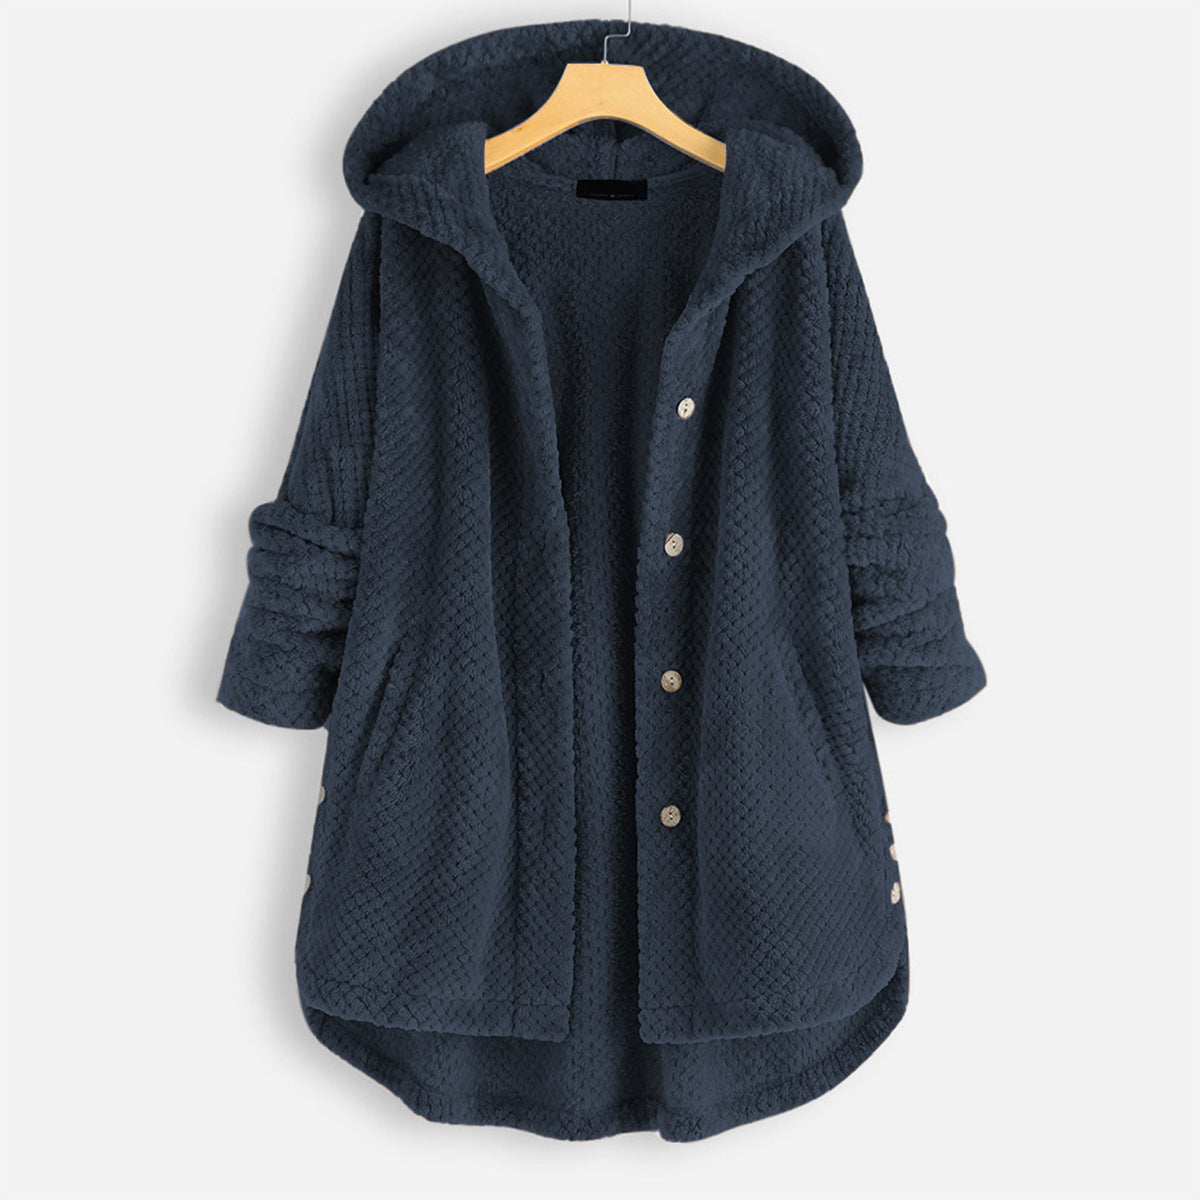 Casual Women Velvet Puls Sizes Hoodies Overcoat-Outerwear-Navy Blue-S-Free Shipping at meselling99